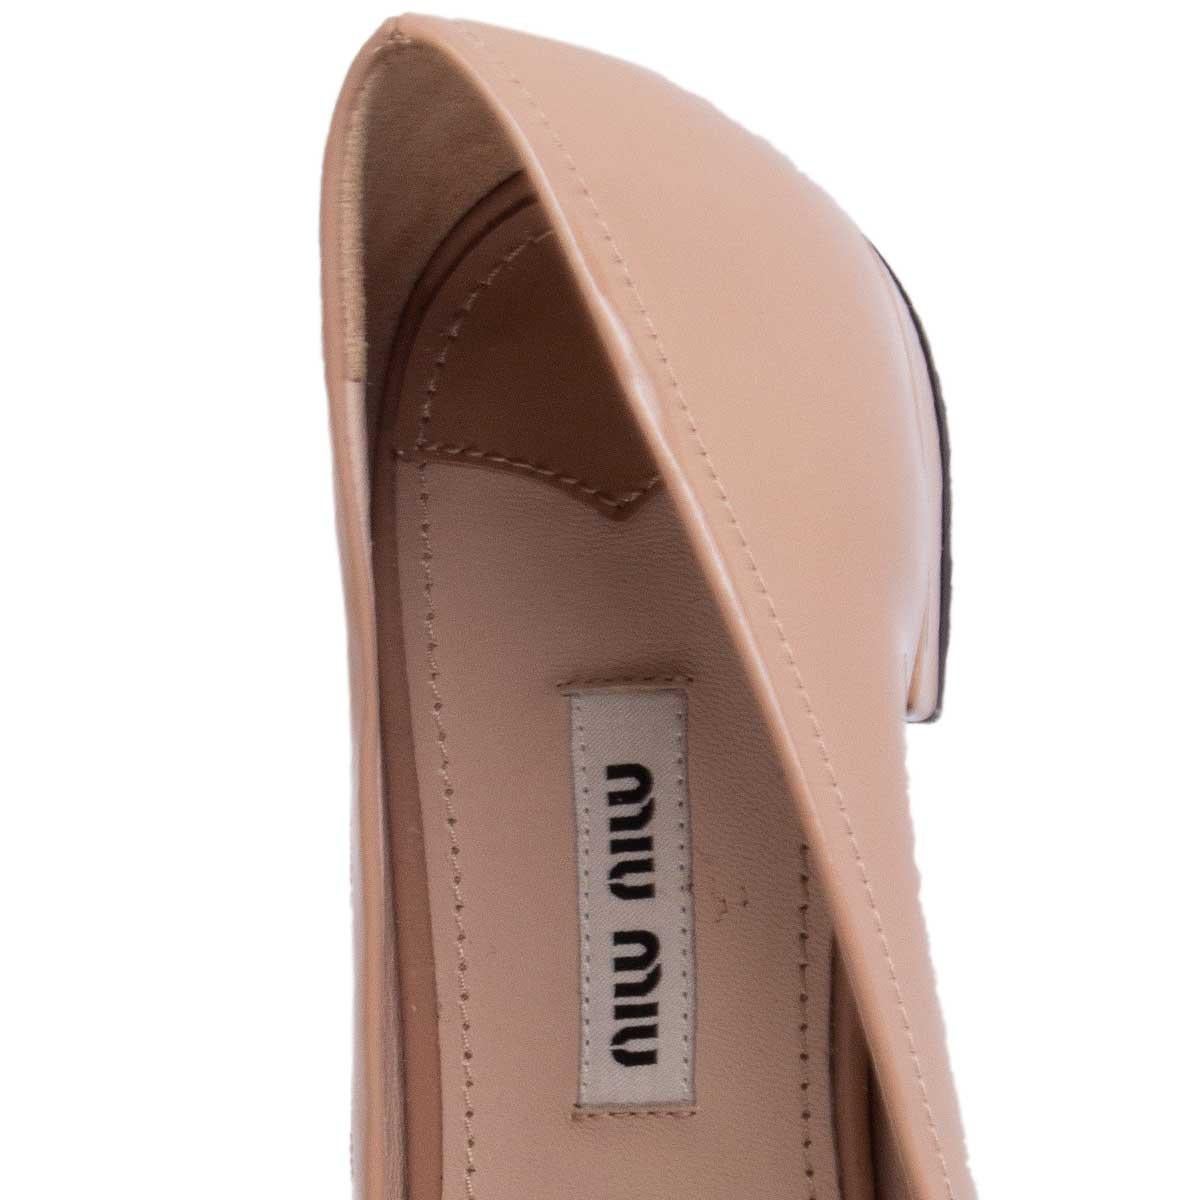 MIU MIU nude pink patent leather CRYSTAL EMBELLISHED Ballet Flats Shoes 37 For Sale 2